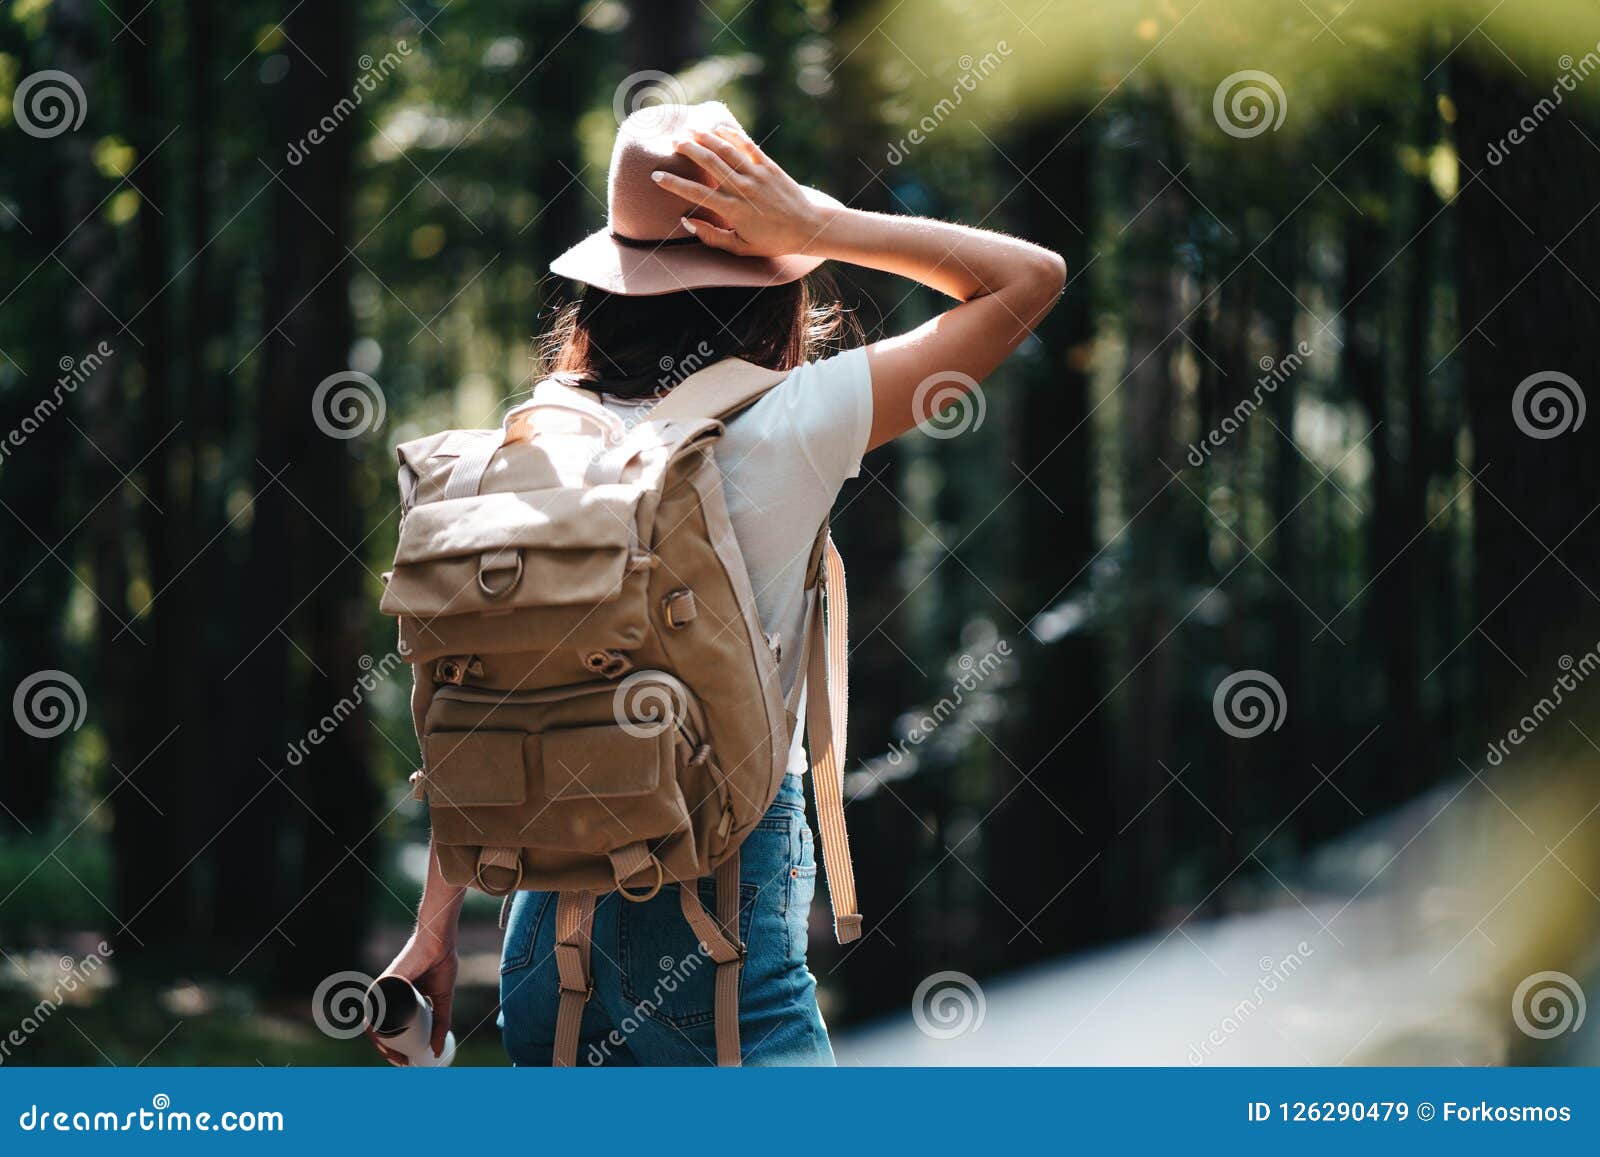 handsome traveler woman with backpack and hat standing in forest. young hipster girl walking among trees on sunset